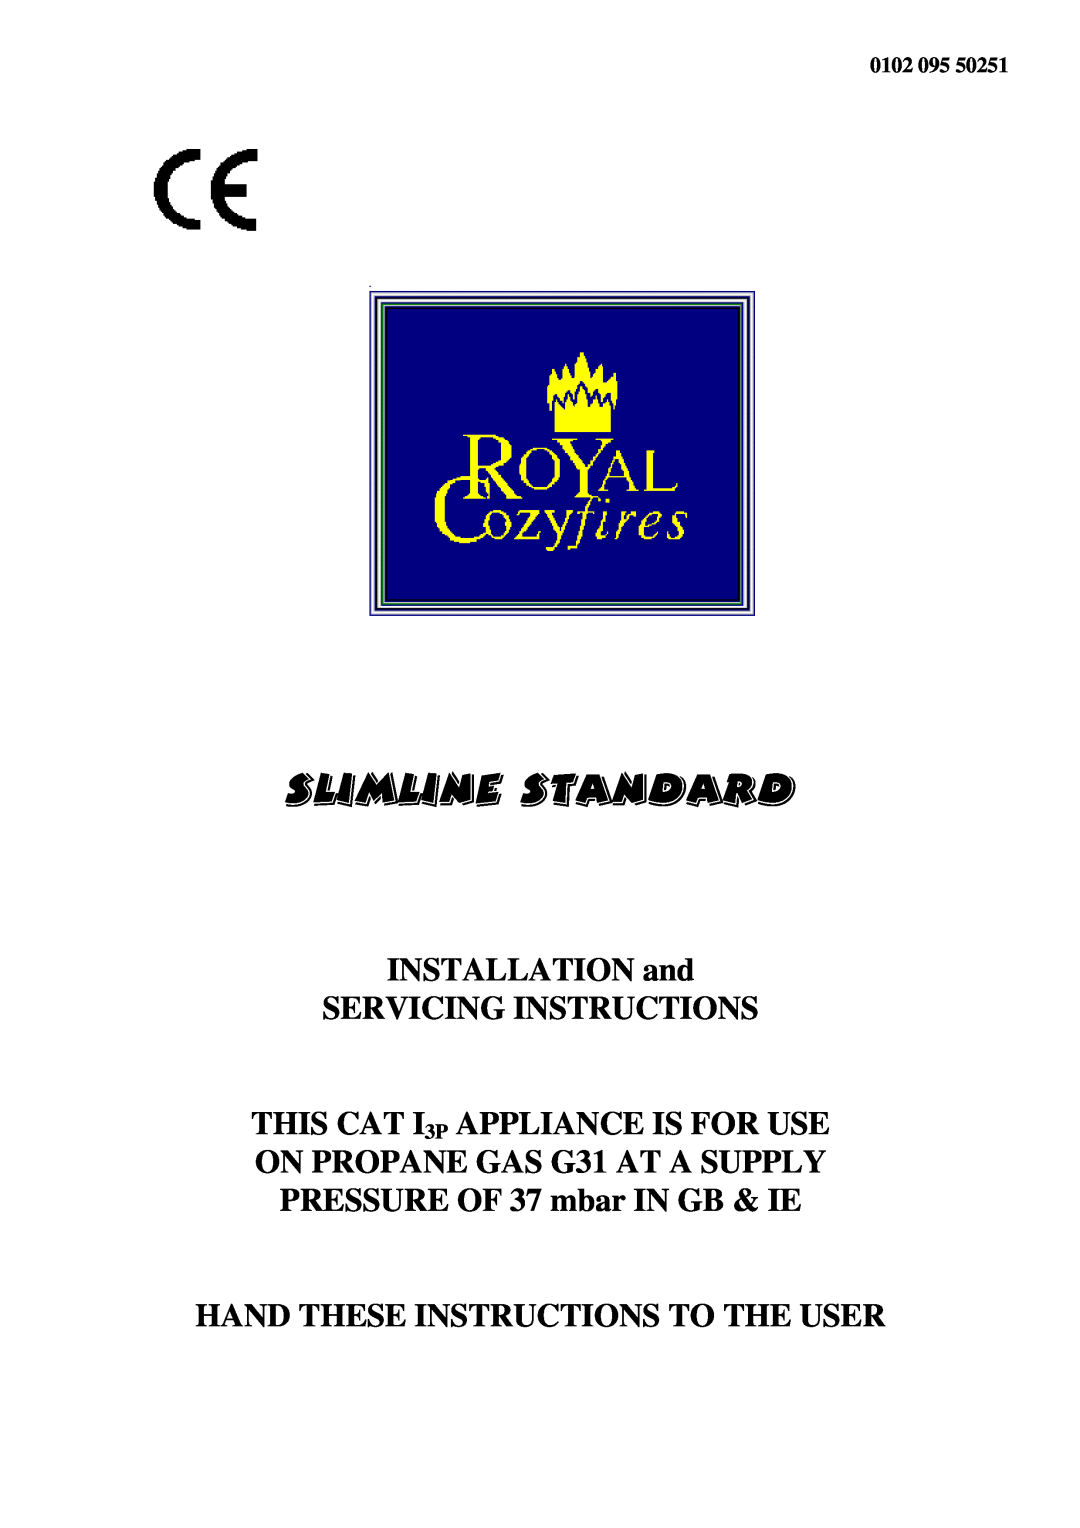 Royal Consumer Information Products G31 manual INSTALLATION and SERVICING INSTRUCTIONS, 6/,0/,167$1$5 